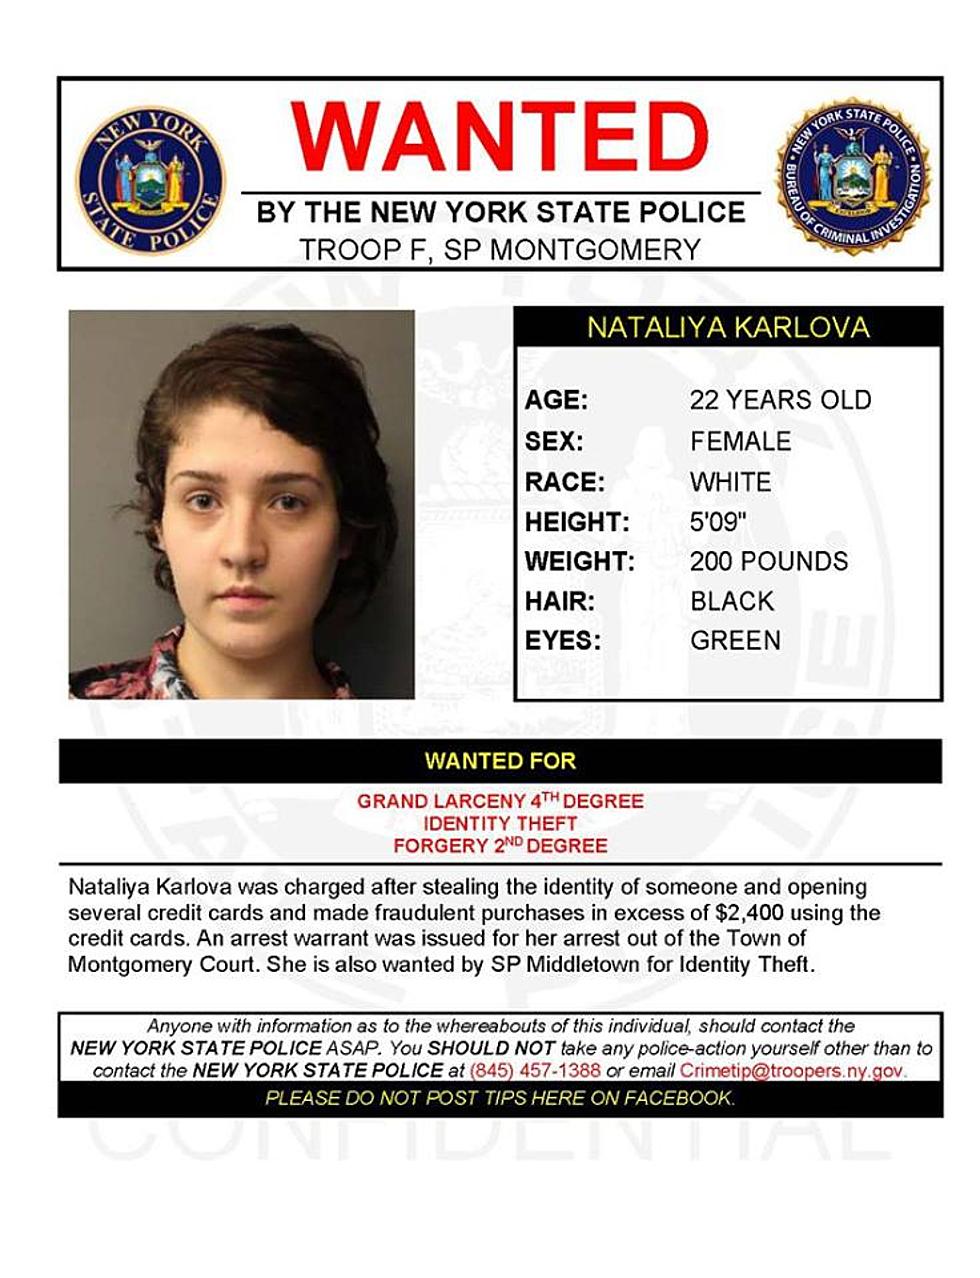 Warrant Wednesday: Orange County Woman Wanted For Larceny, Identity Theft, and Forgery